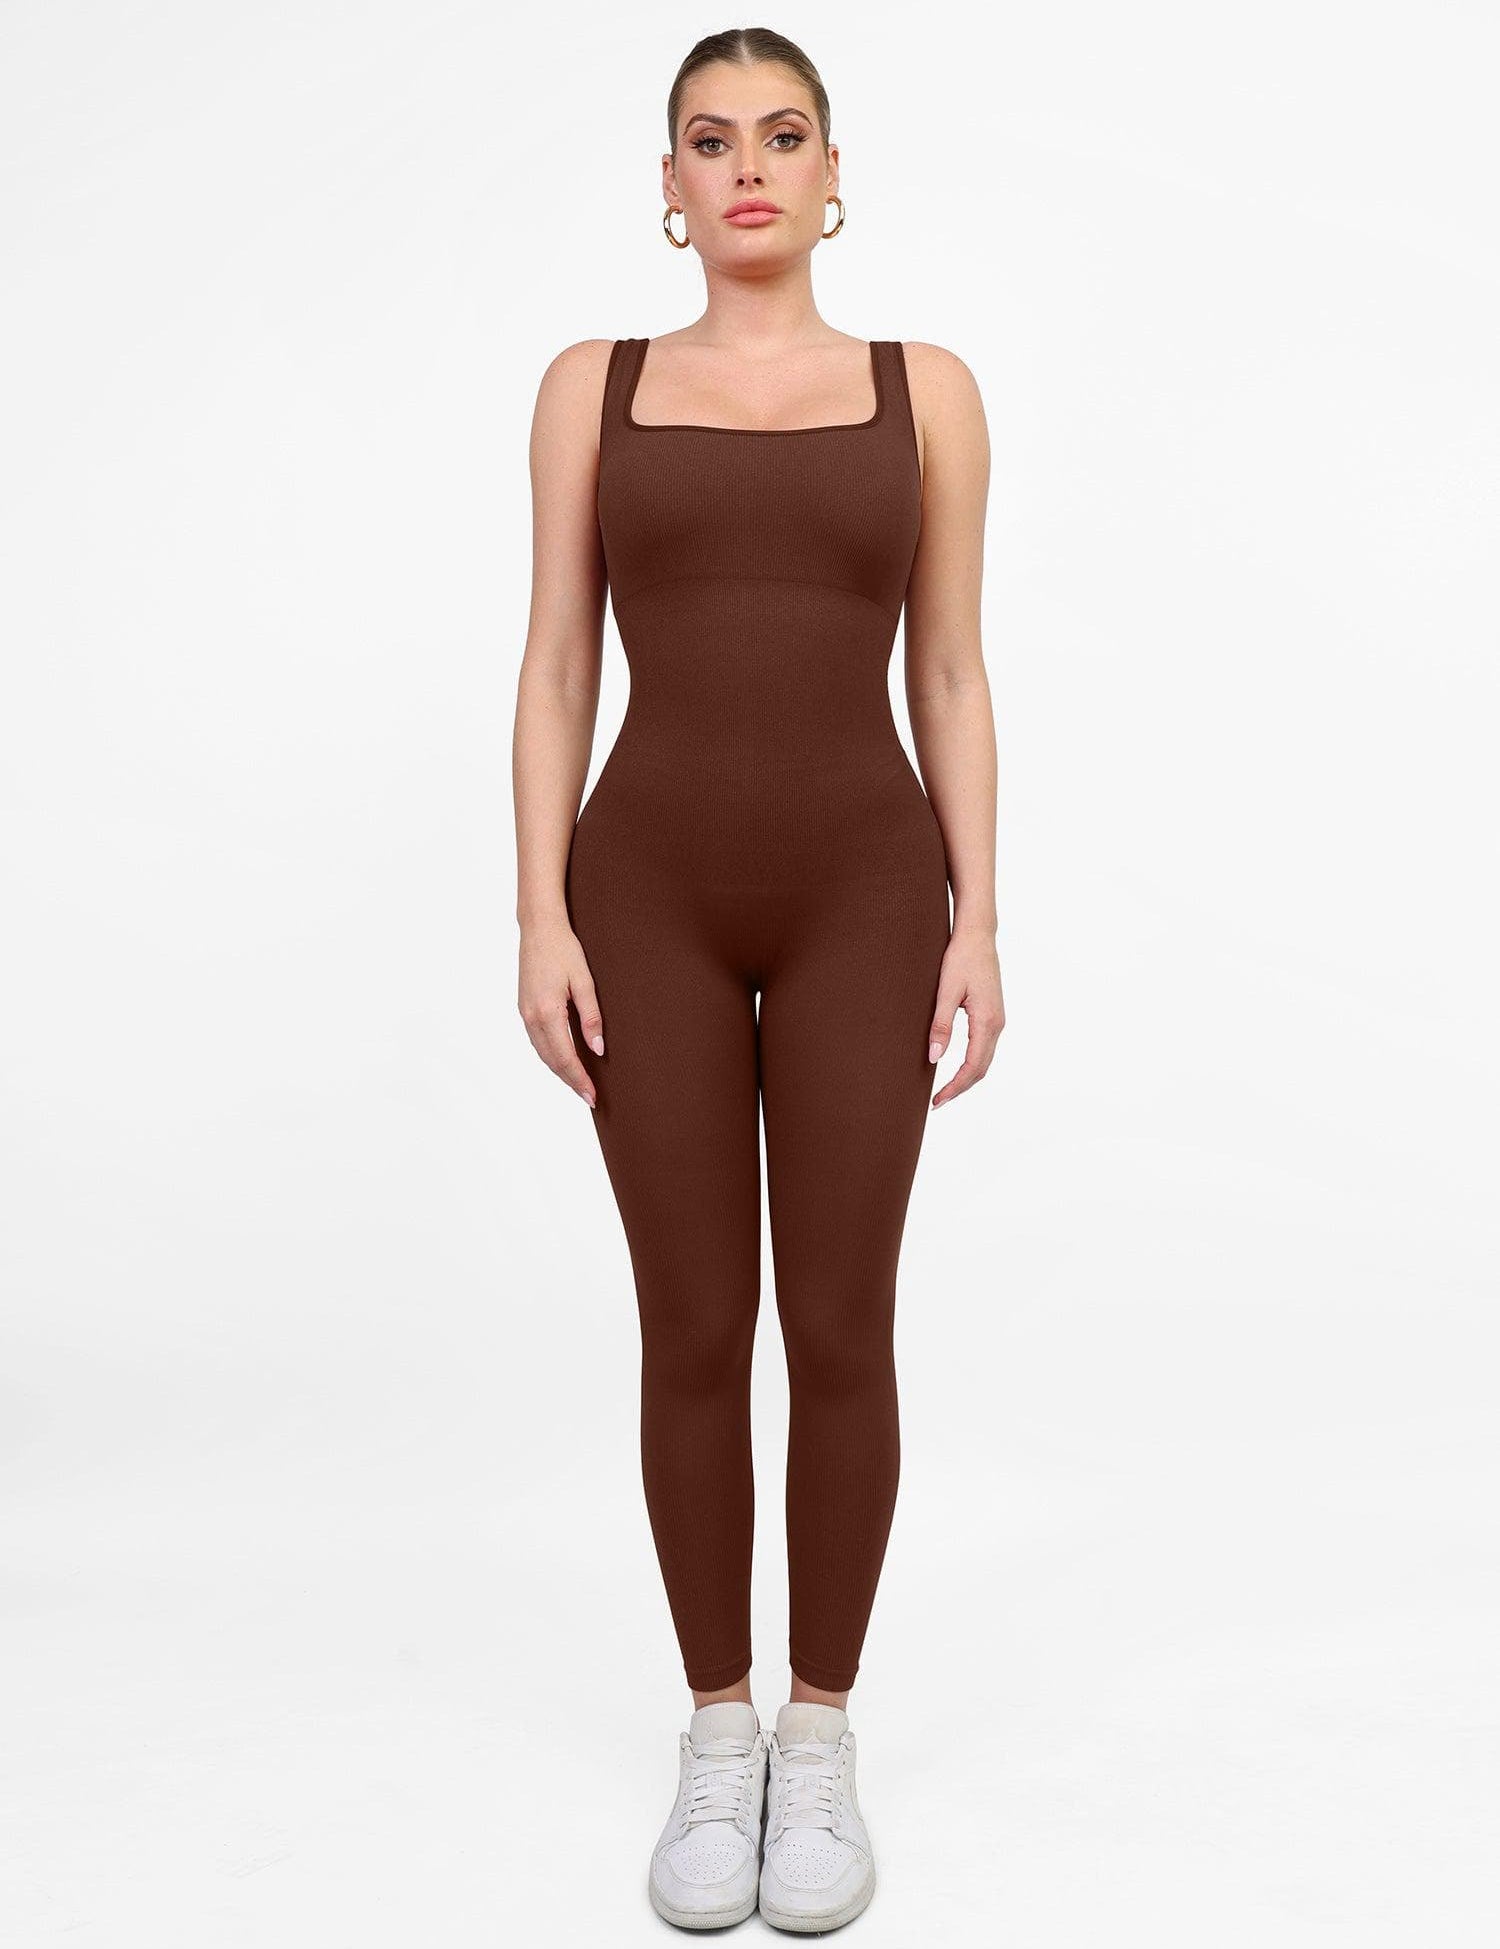  S Seamless Square Neck One Piece Sport Jumpsuit